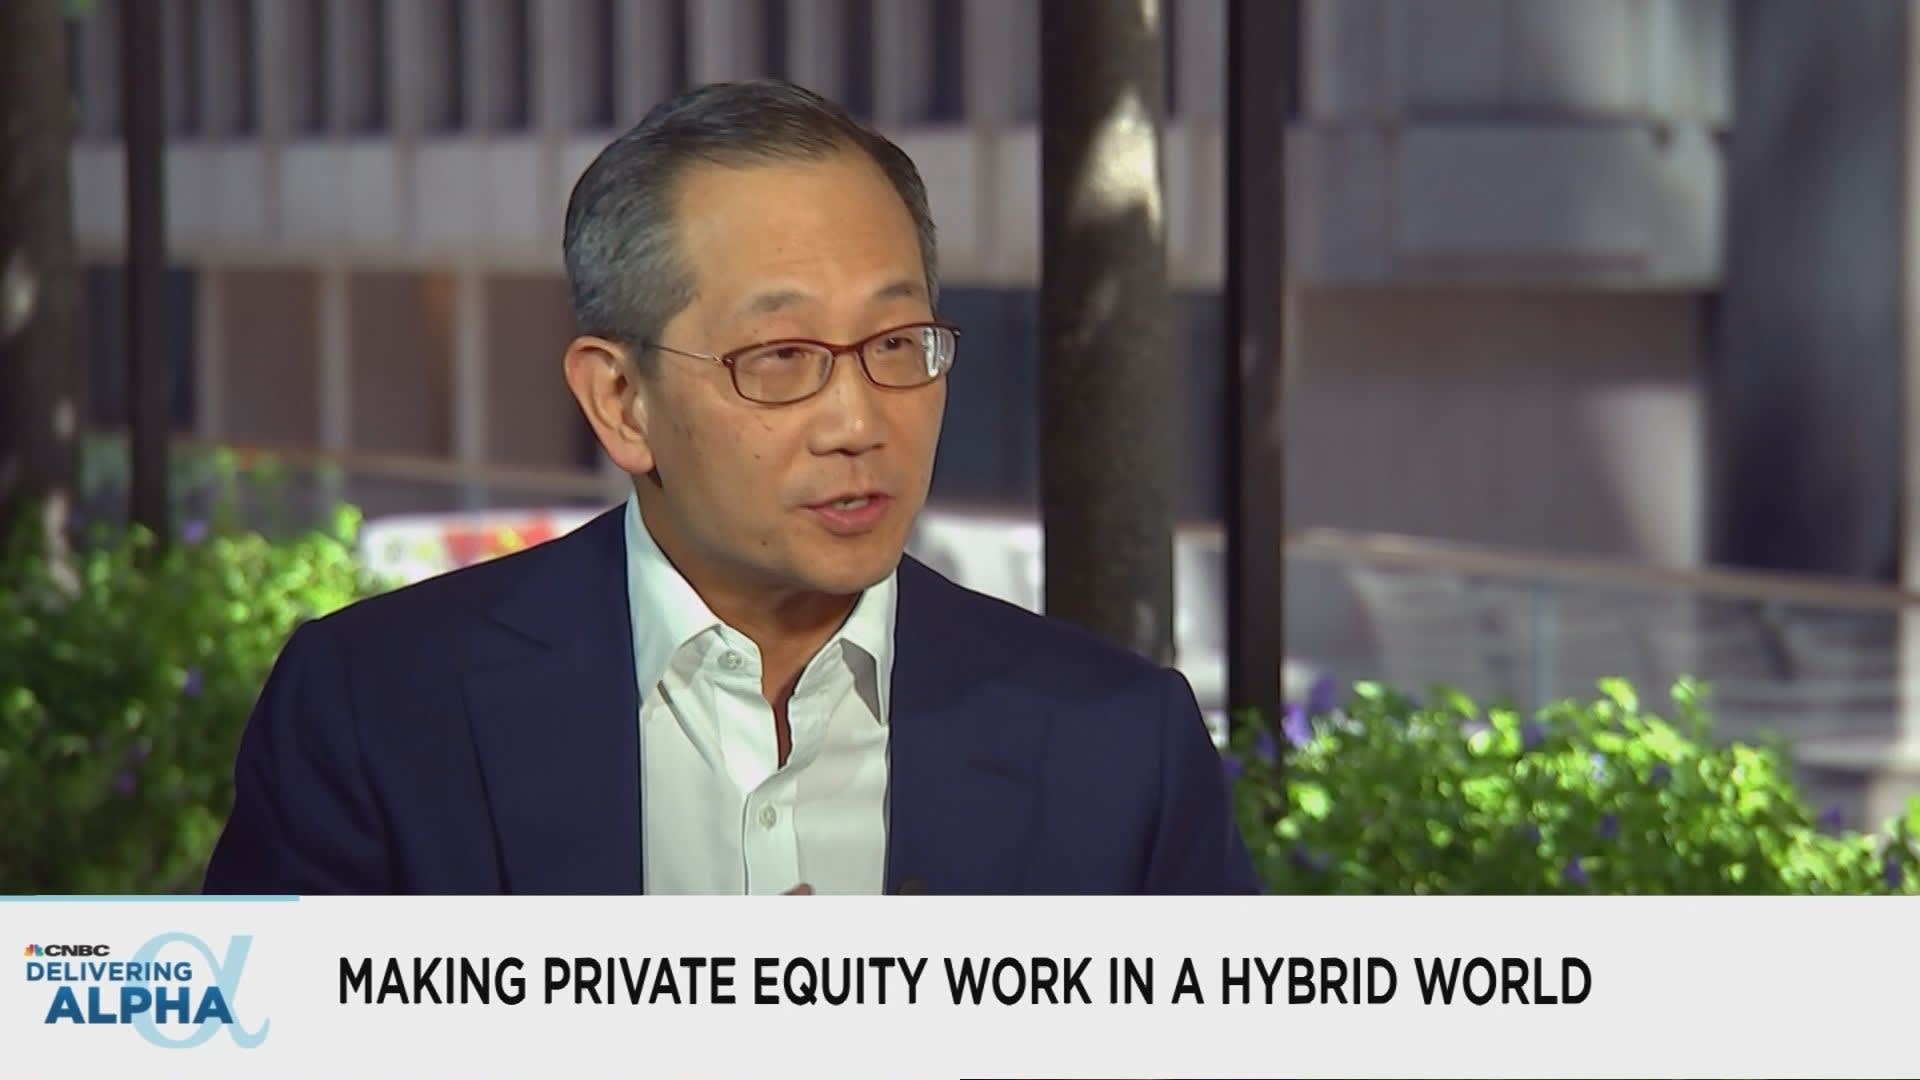 Carlyle CEO Kewsong Lee on what's driving the stock's run and creating a  modern private equity firm